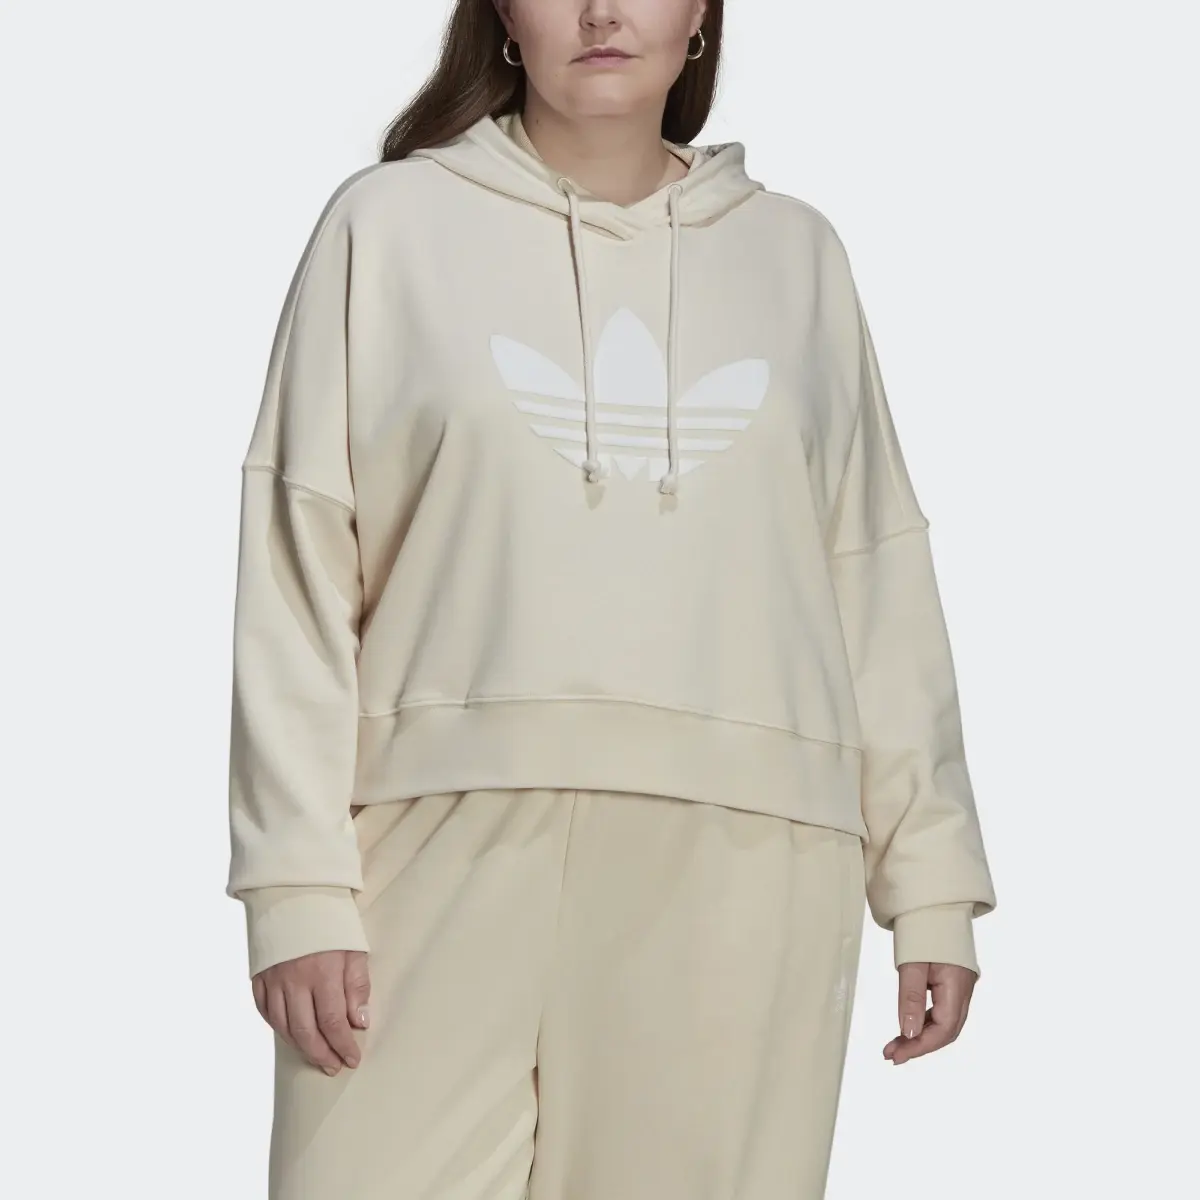 Adidas Cropped Hoodie (Plus Size). 1